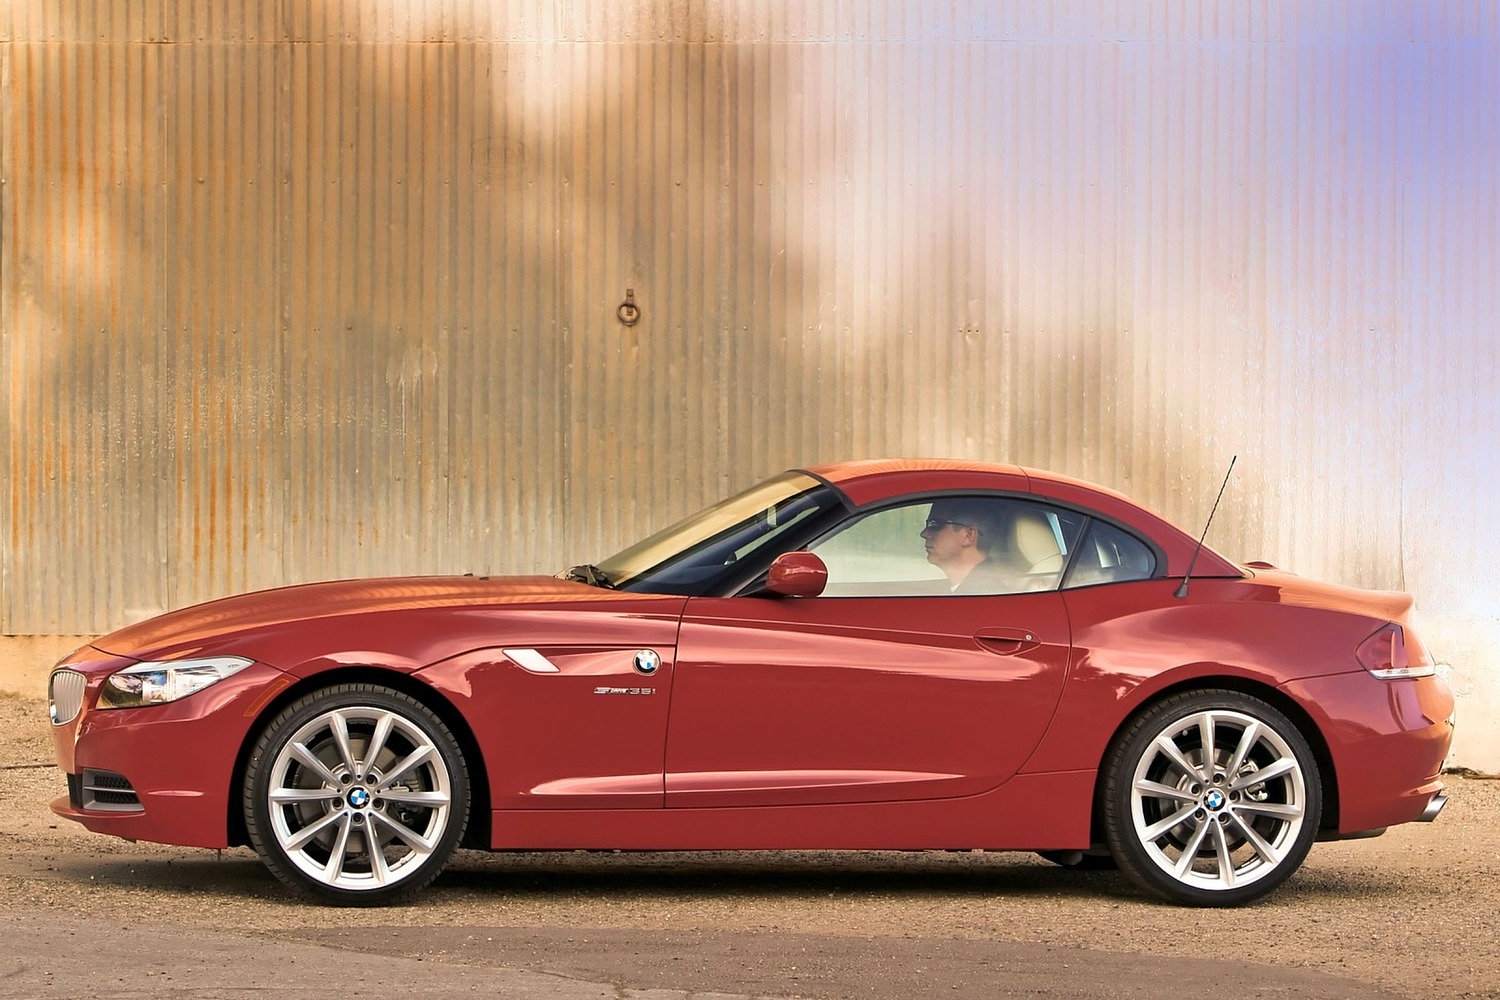 BMW Z4 sDrive35i Convertible Exterior (2012 model year shown)